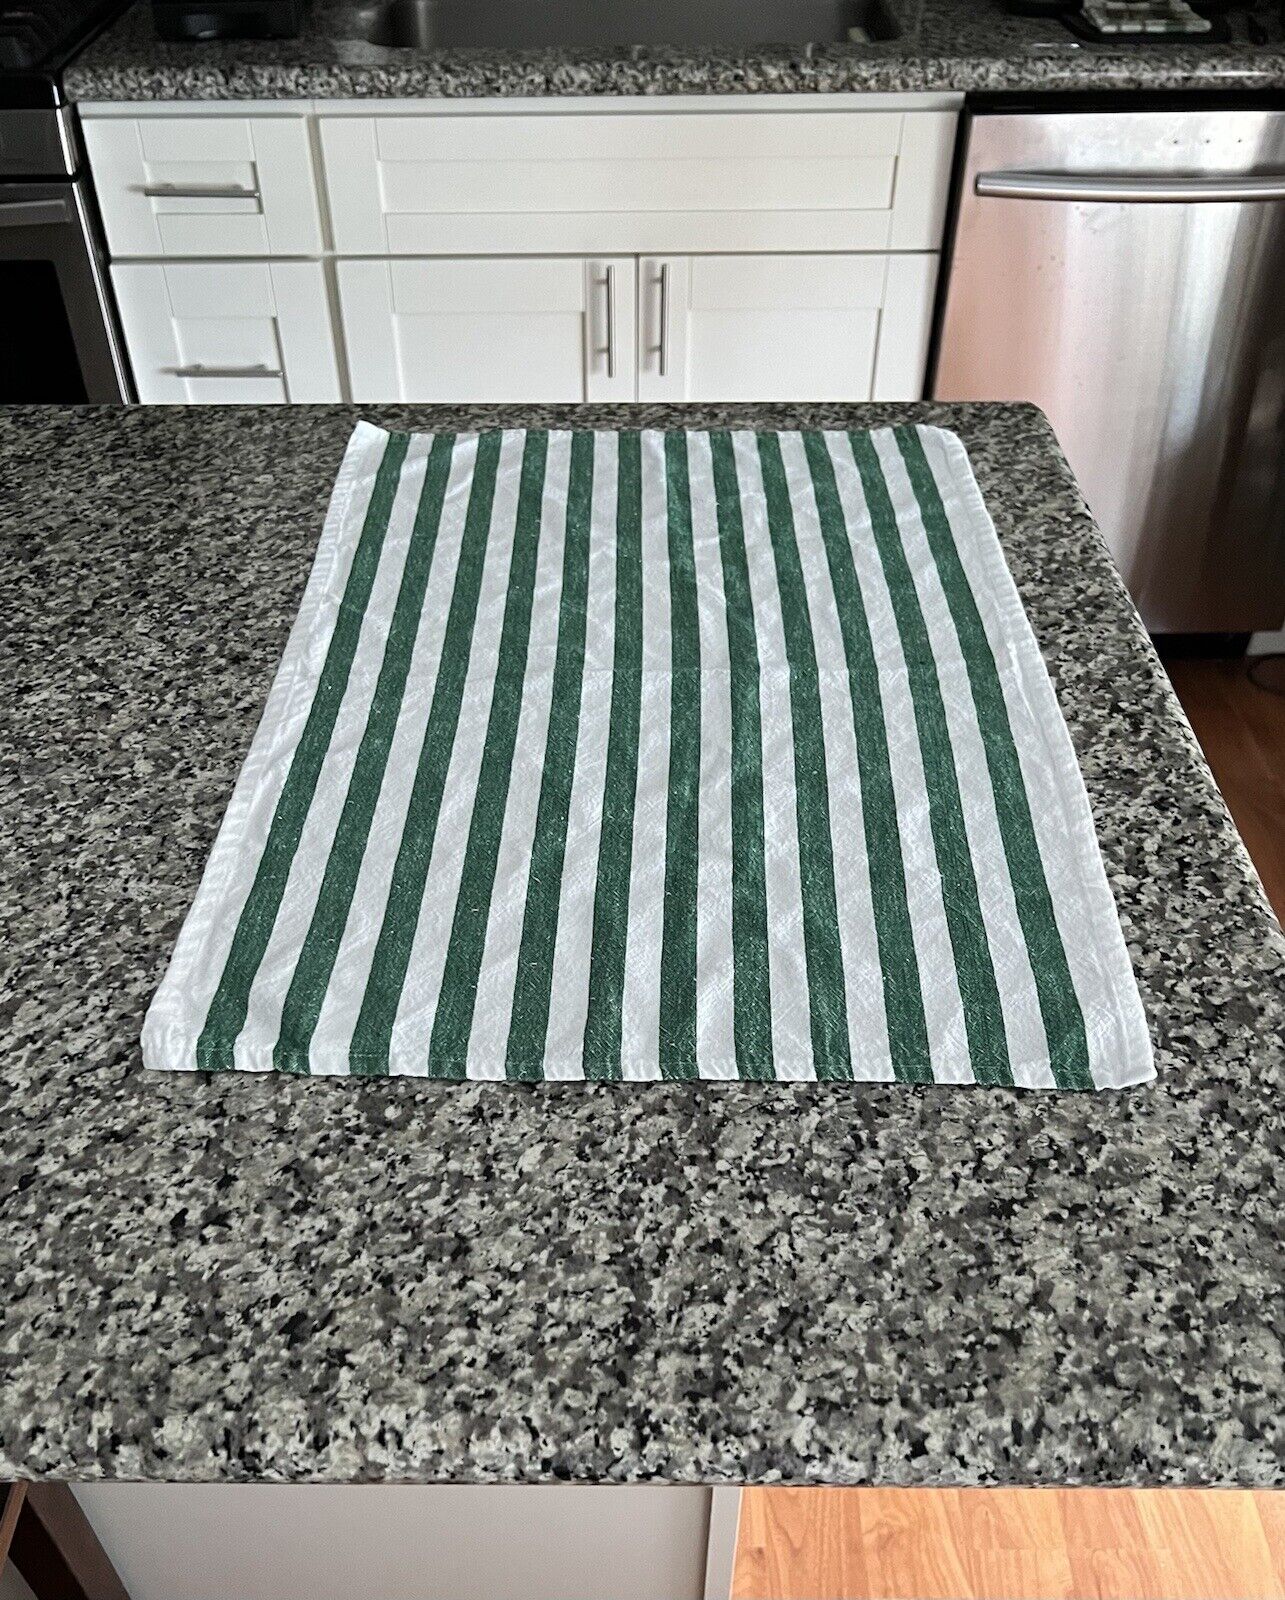 Vintage Green And White Striped Kitchen Hand Towel Cotton Blend 26” Used